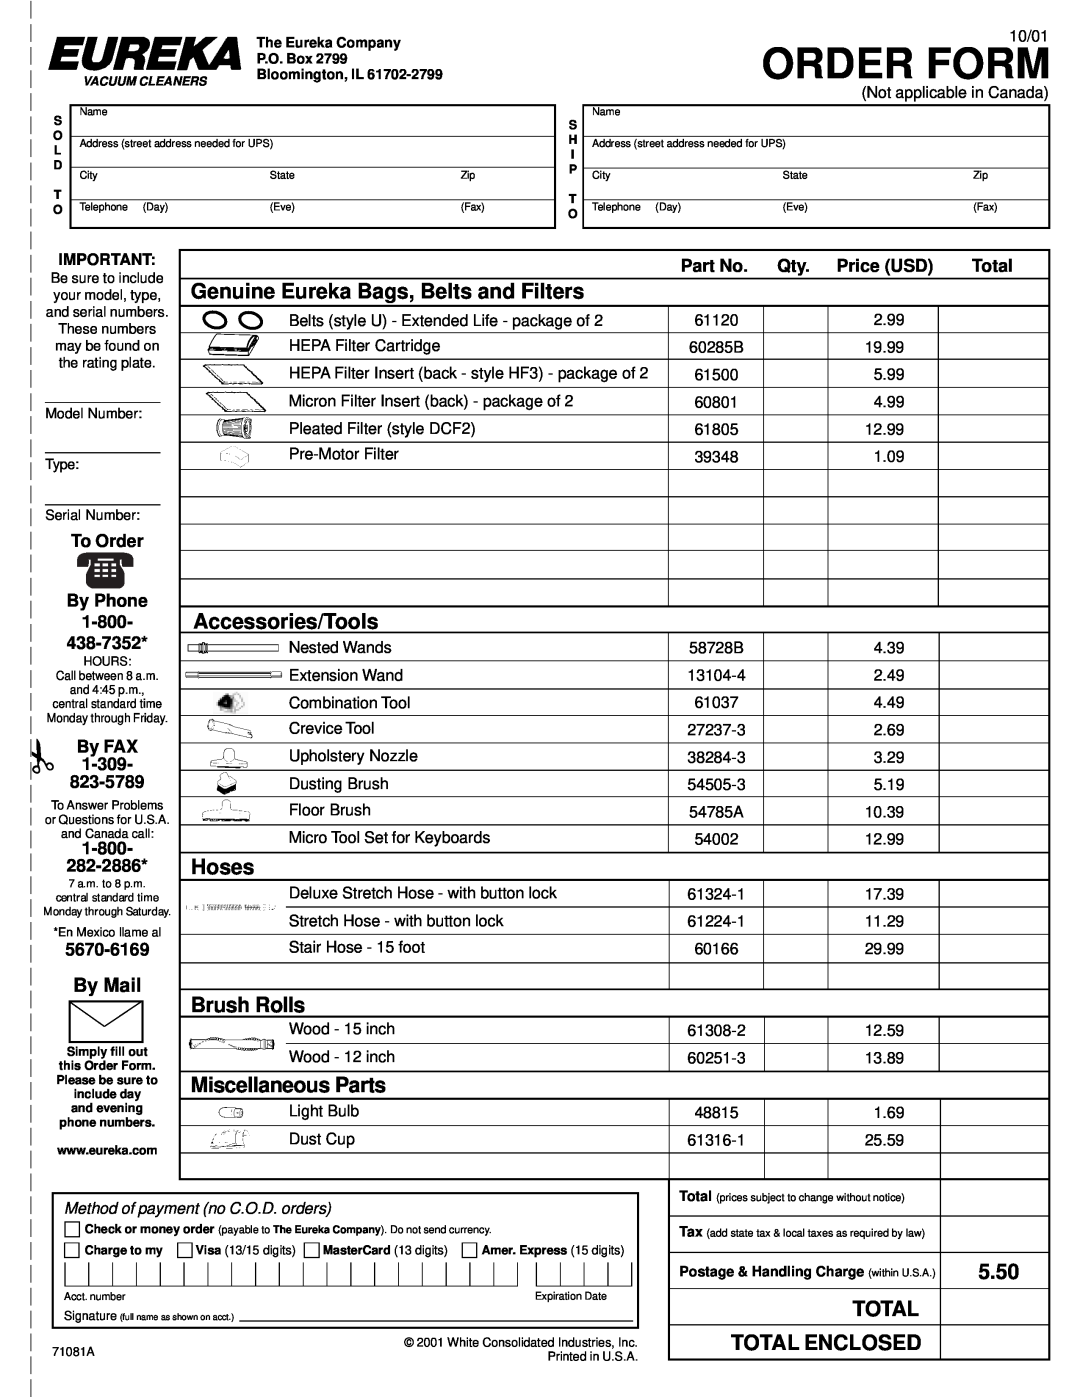 Eureka 4680 Order Form, Genuine Eureka Bags, Belts and Filters, Accessories/Tools, Hoses, Brush Rolls, Miscellaneous Parts 